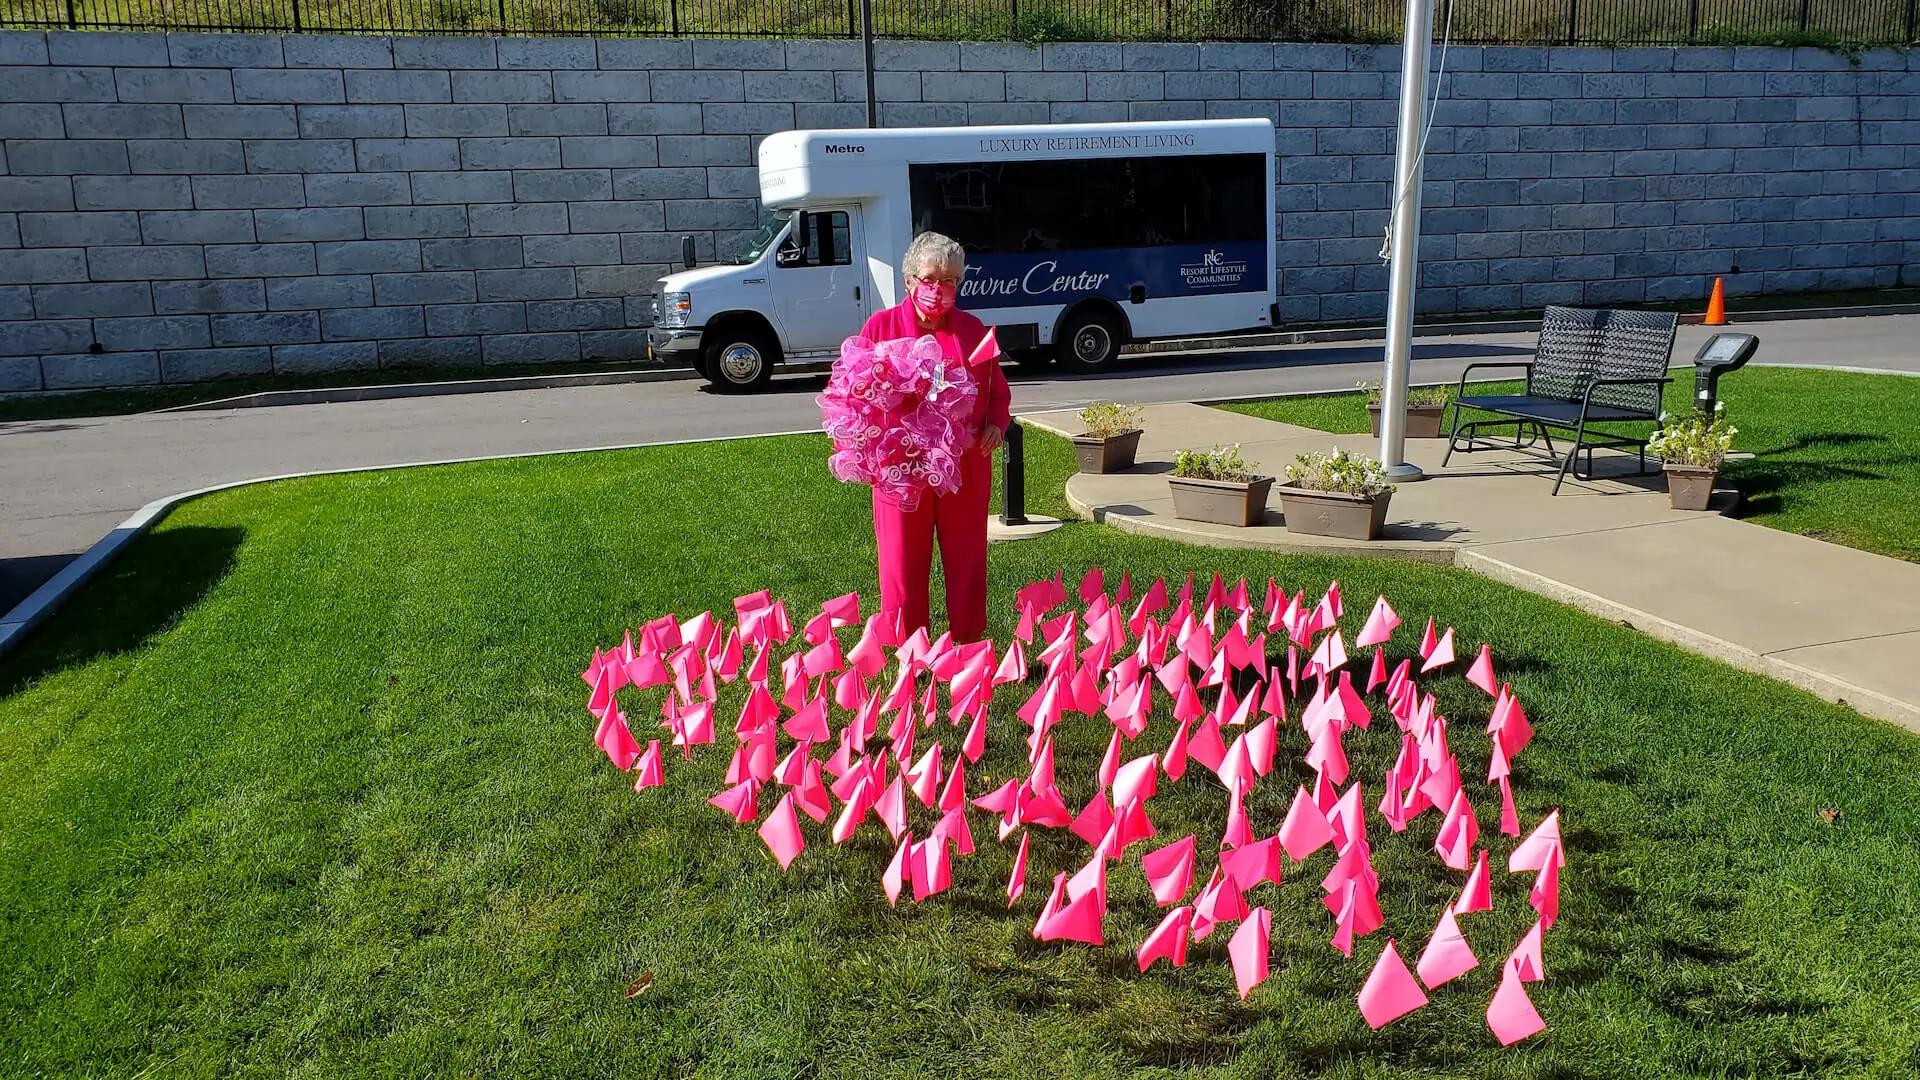 Towne Center Retirement Community in Fayetteville is looking to paint the town pink in a new fundraiser, Fayetteville Fields of Pink, with all proceeds benefiting the nonprofit cancer research organization The Baldwin Fund.